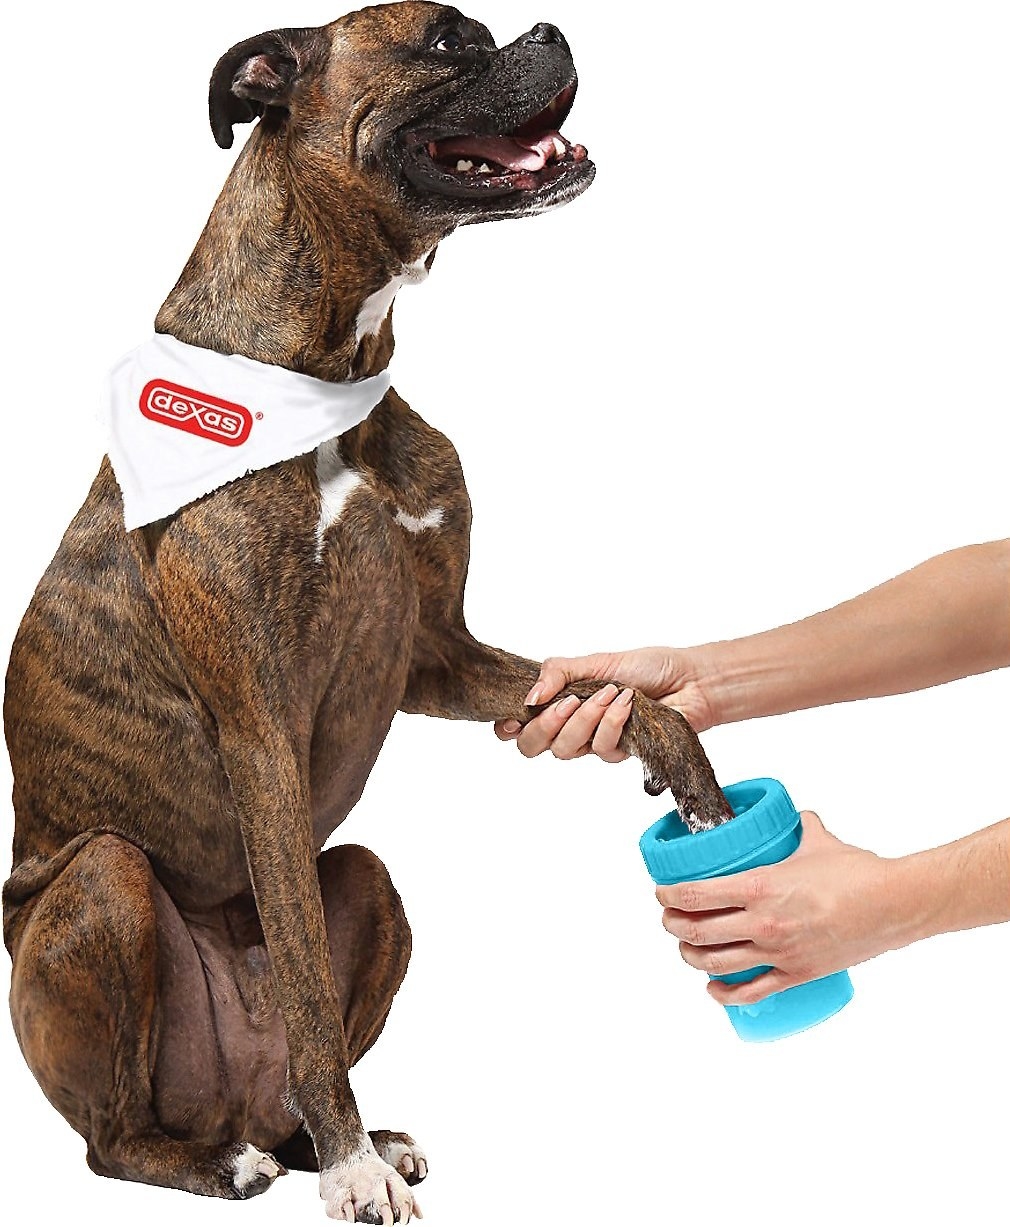 Dog using the blue paw cleaner